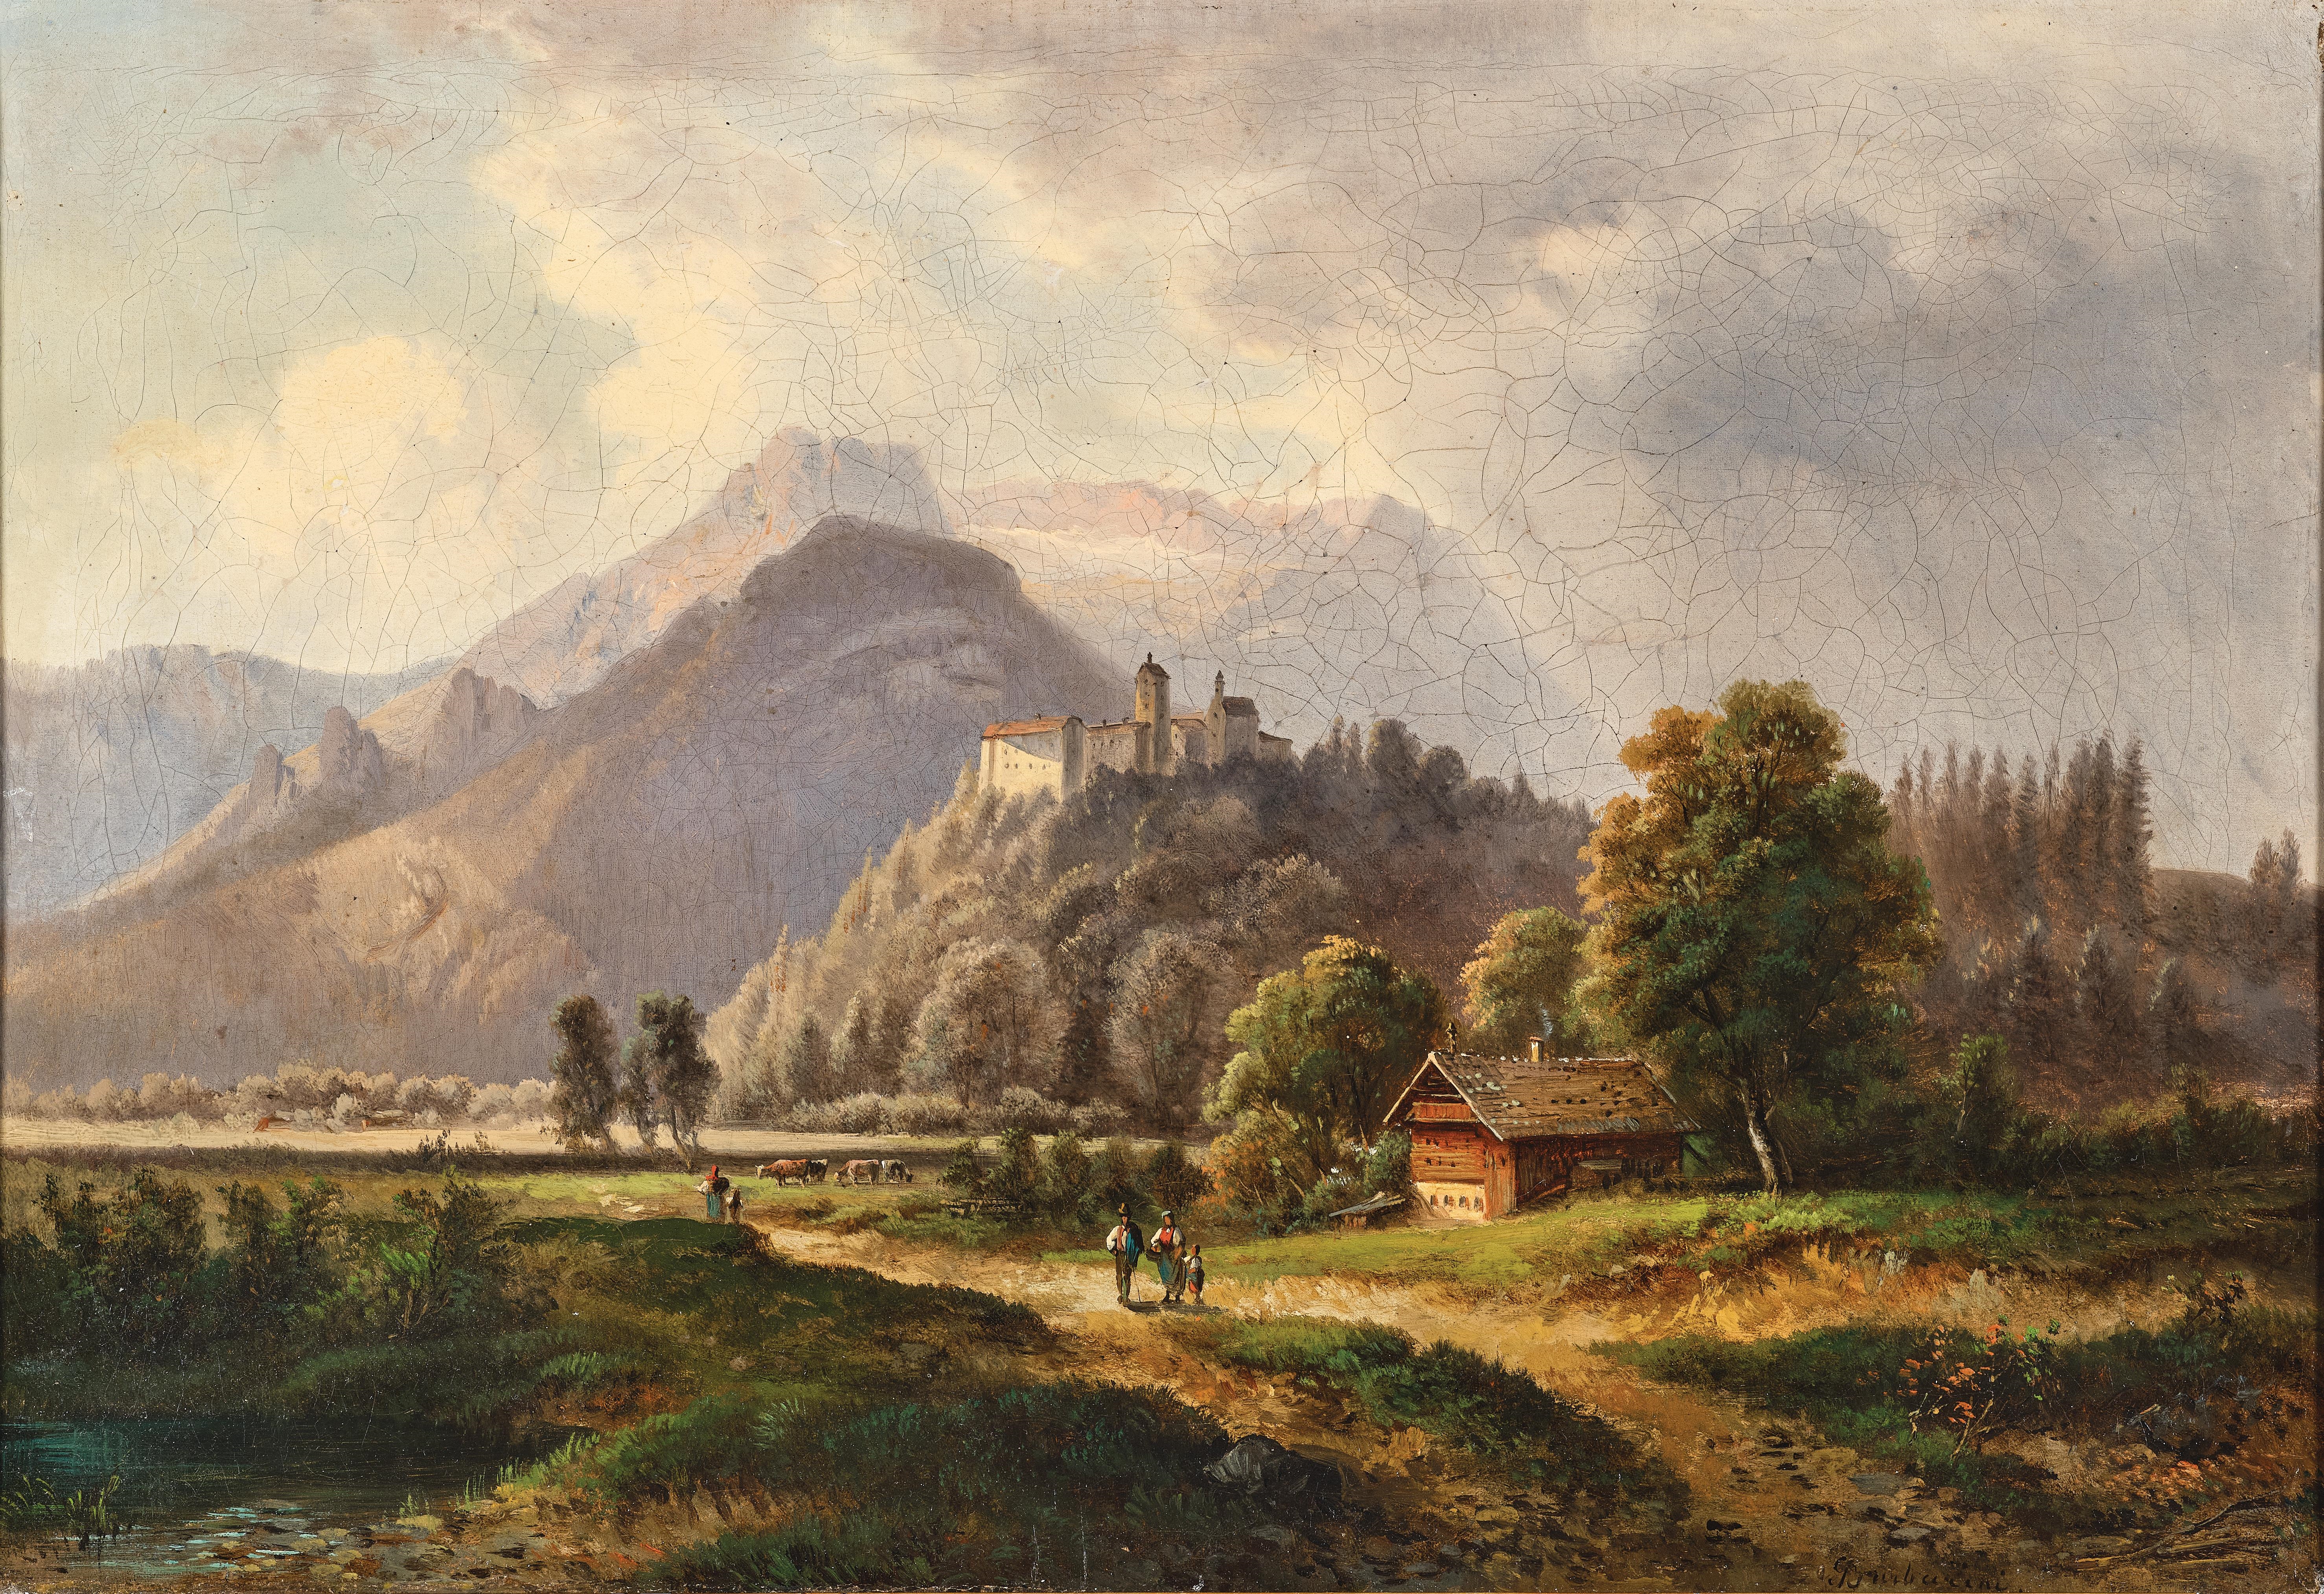 Artwork by Gustav Barbarini, A View of the Glanegg Castle Ruins, Made of oil on canvas